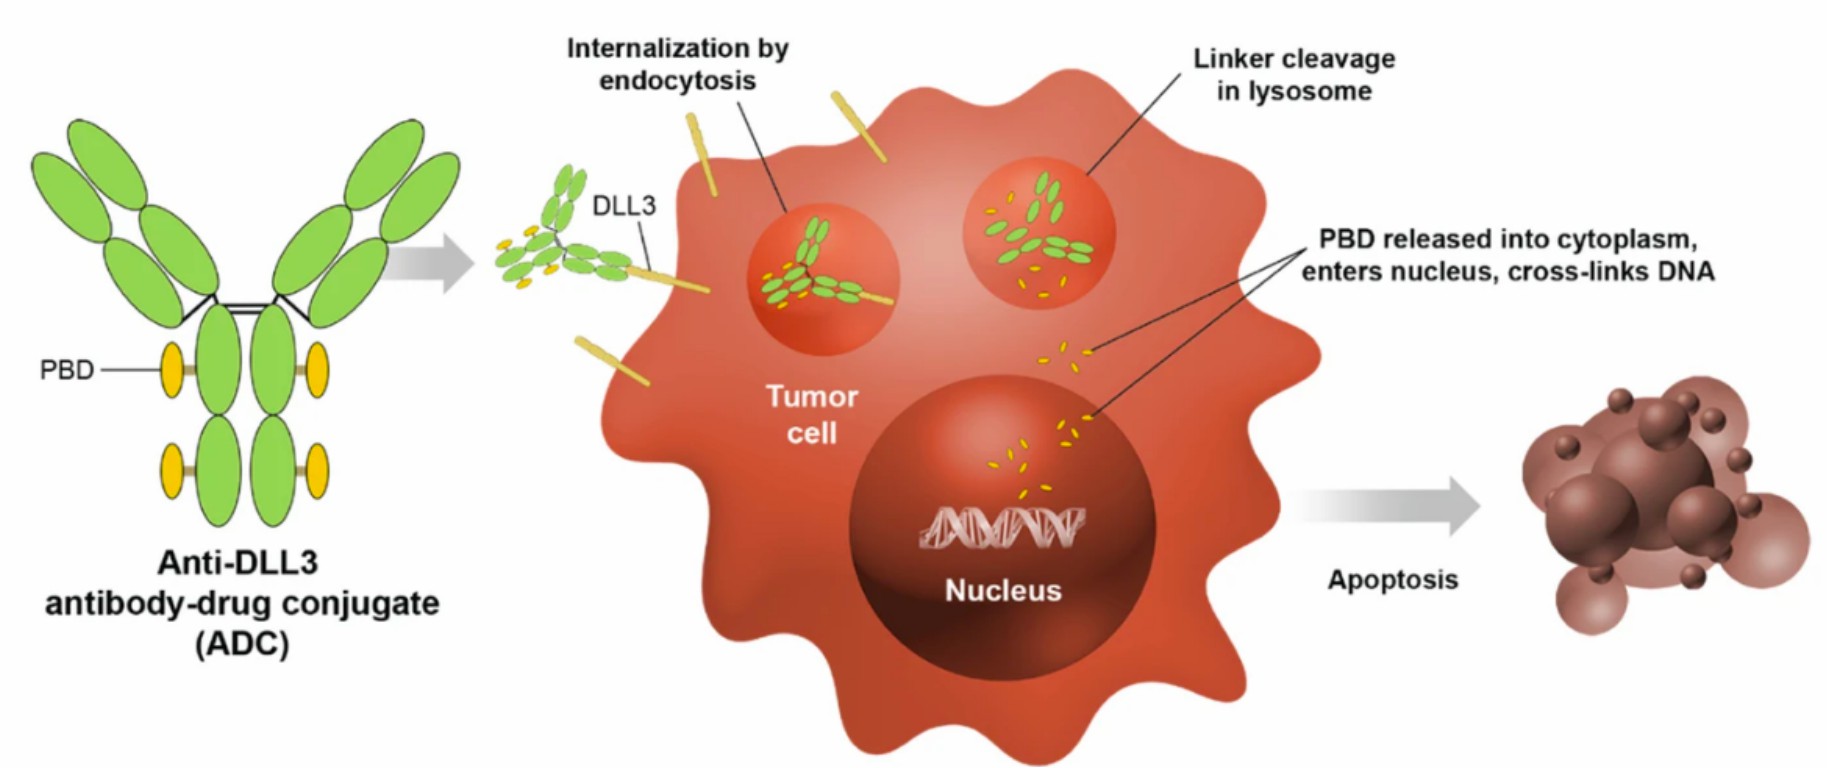 Internalization of the ADC (DLL3-targeted antibody-drug conjugate) to lysosomes(Owen, et al., 2019)